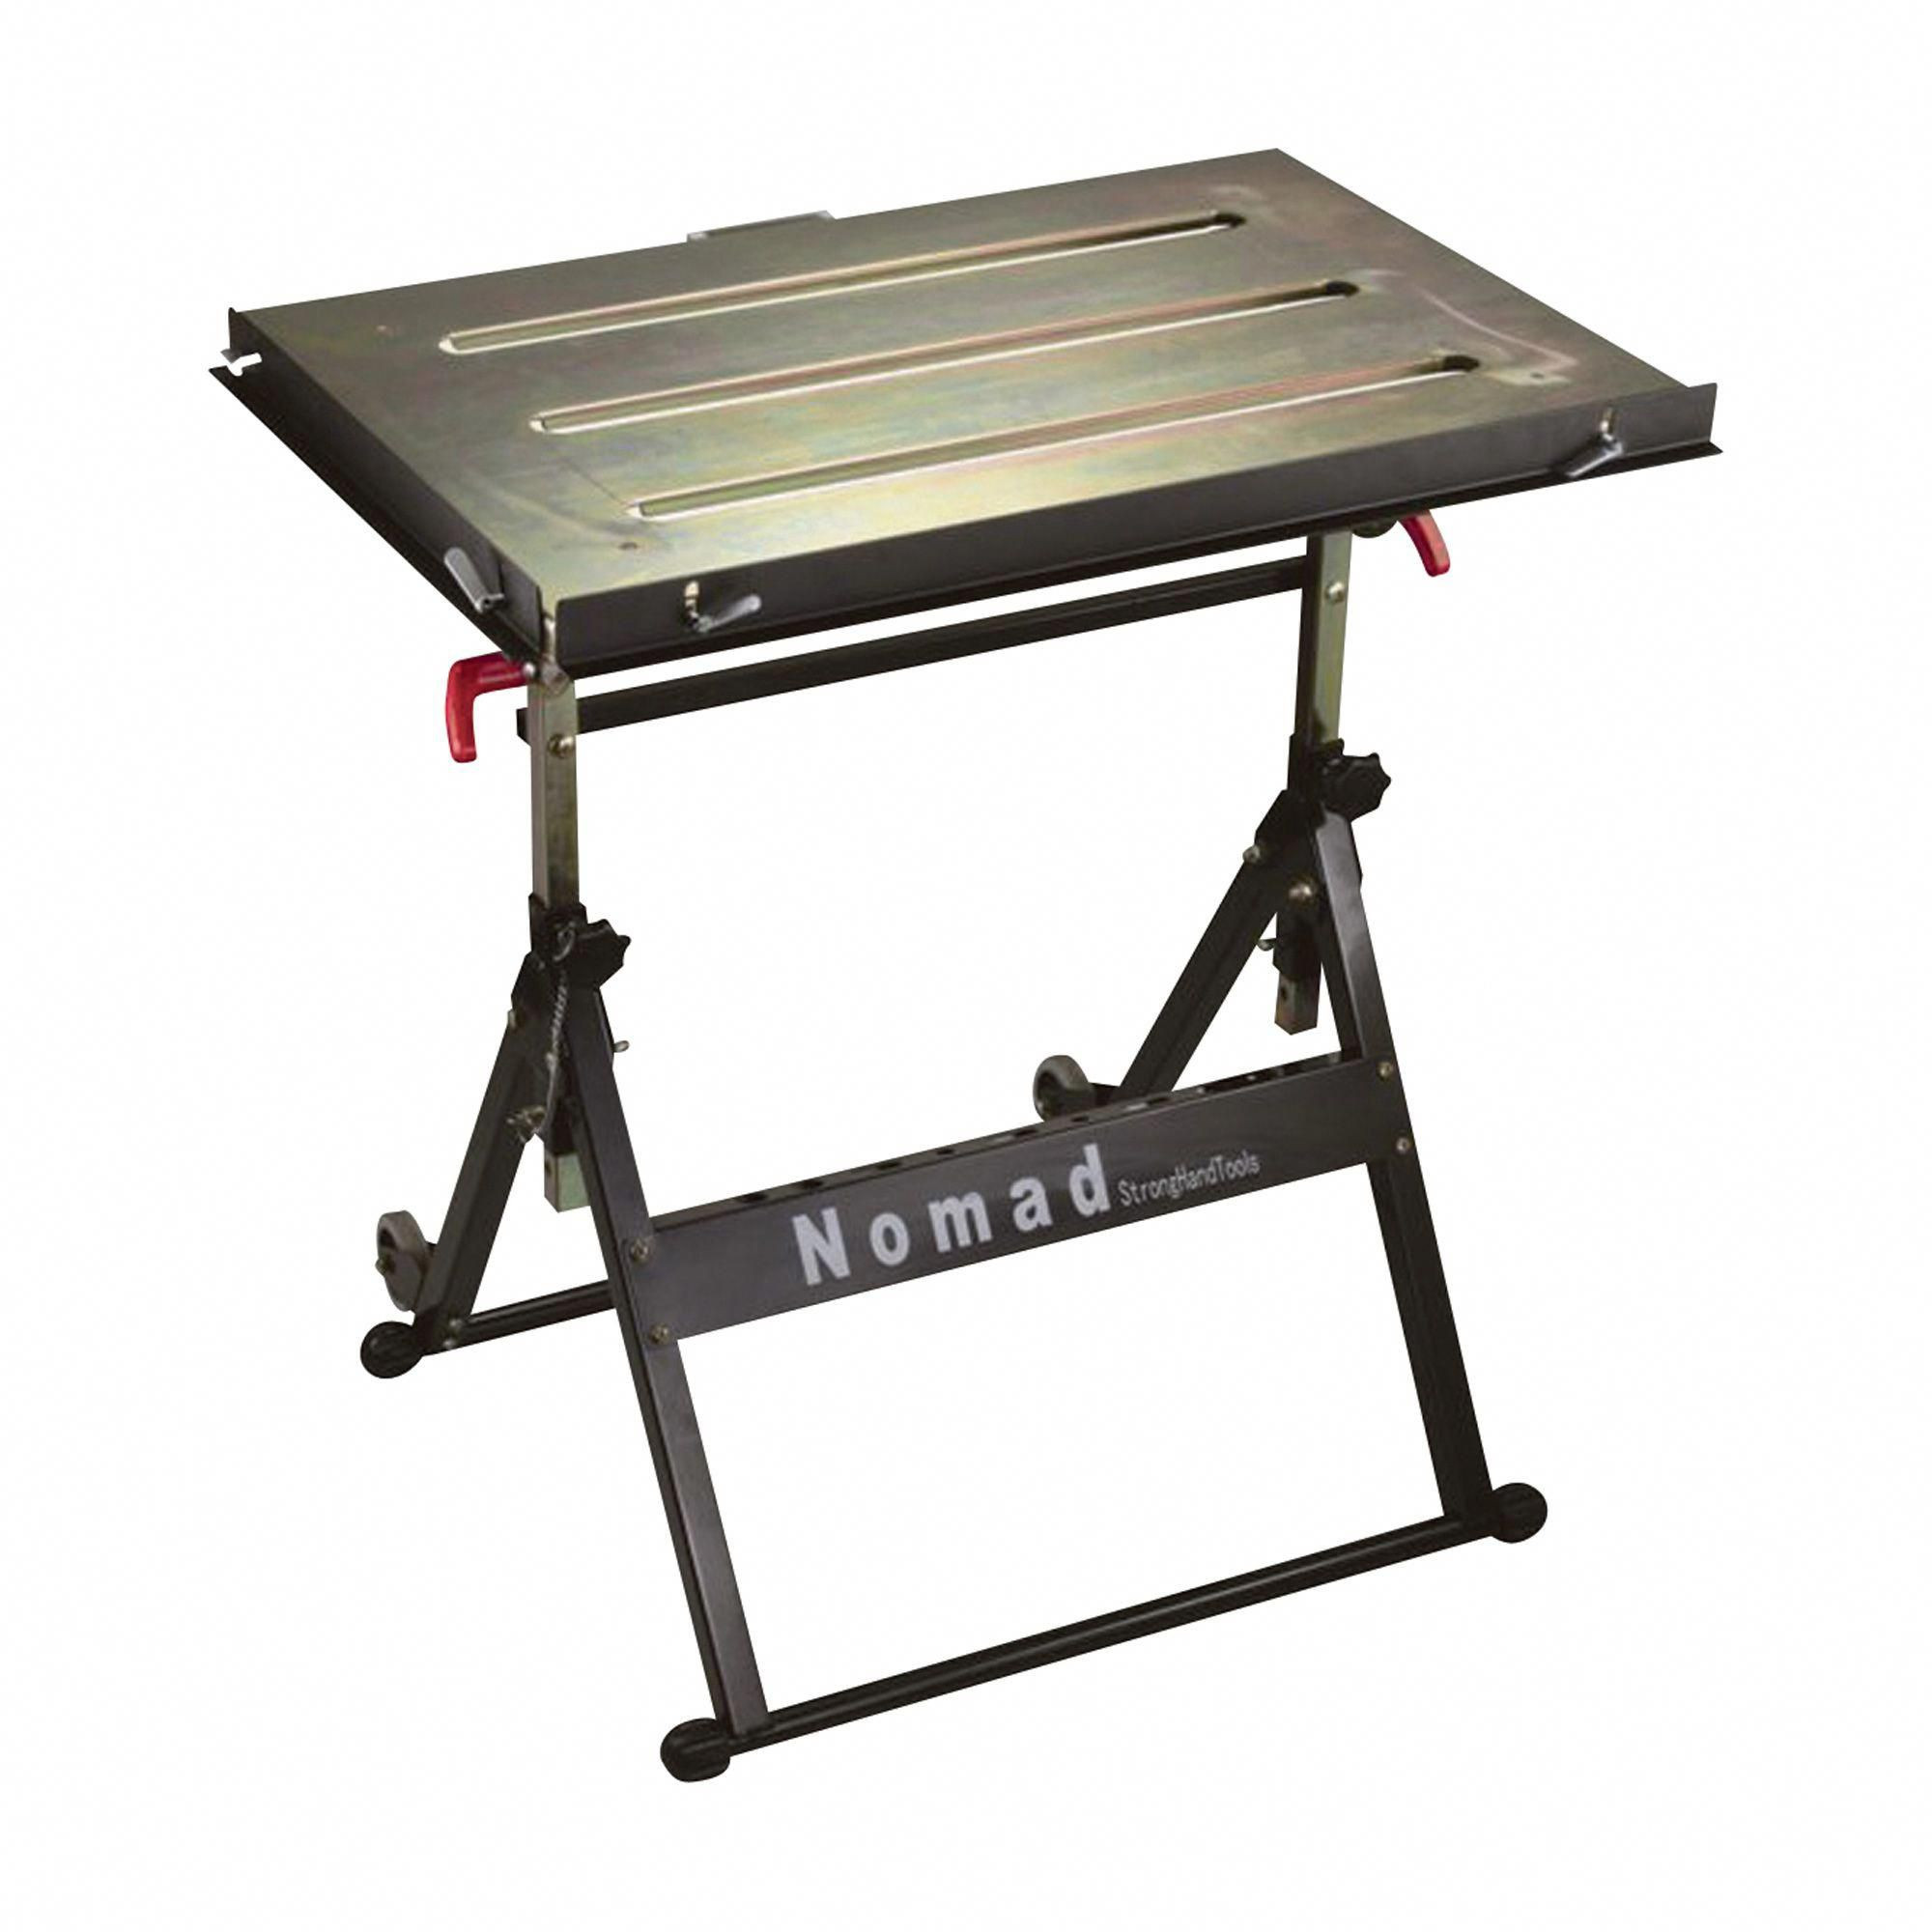 DIY Welding Table Plans
 plans for welding table Weldingtable With images